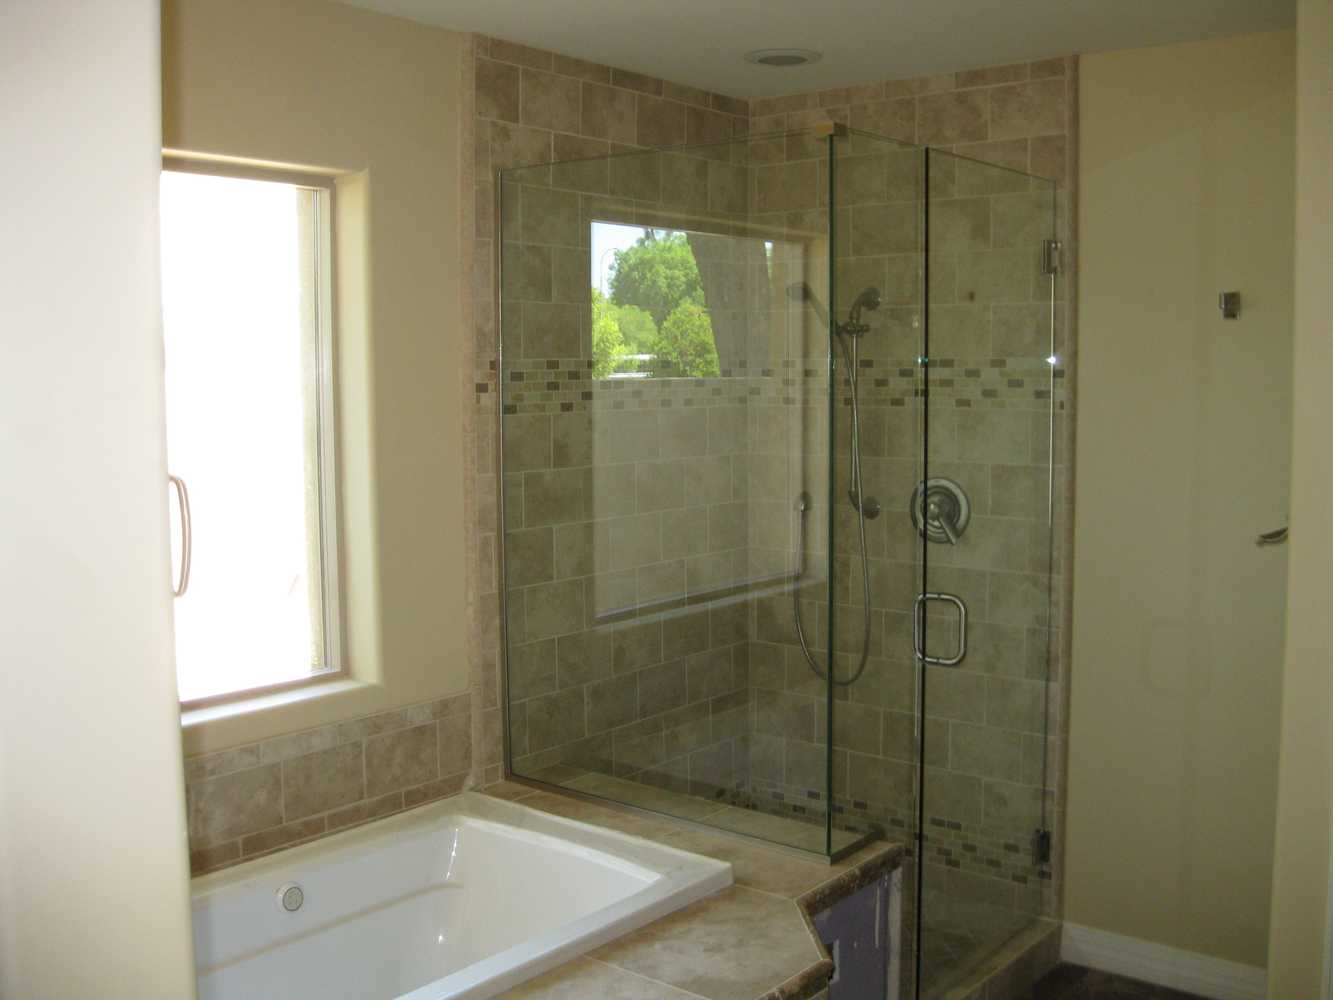 Photos from Realmonde Builders Inc